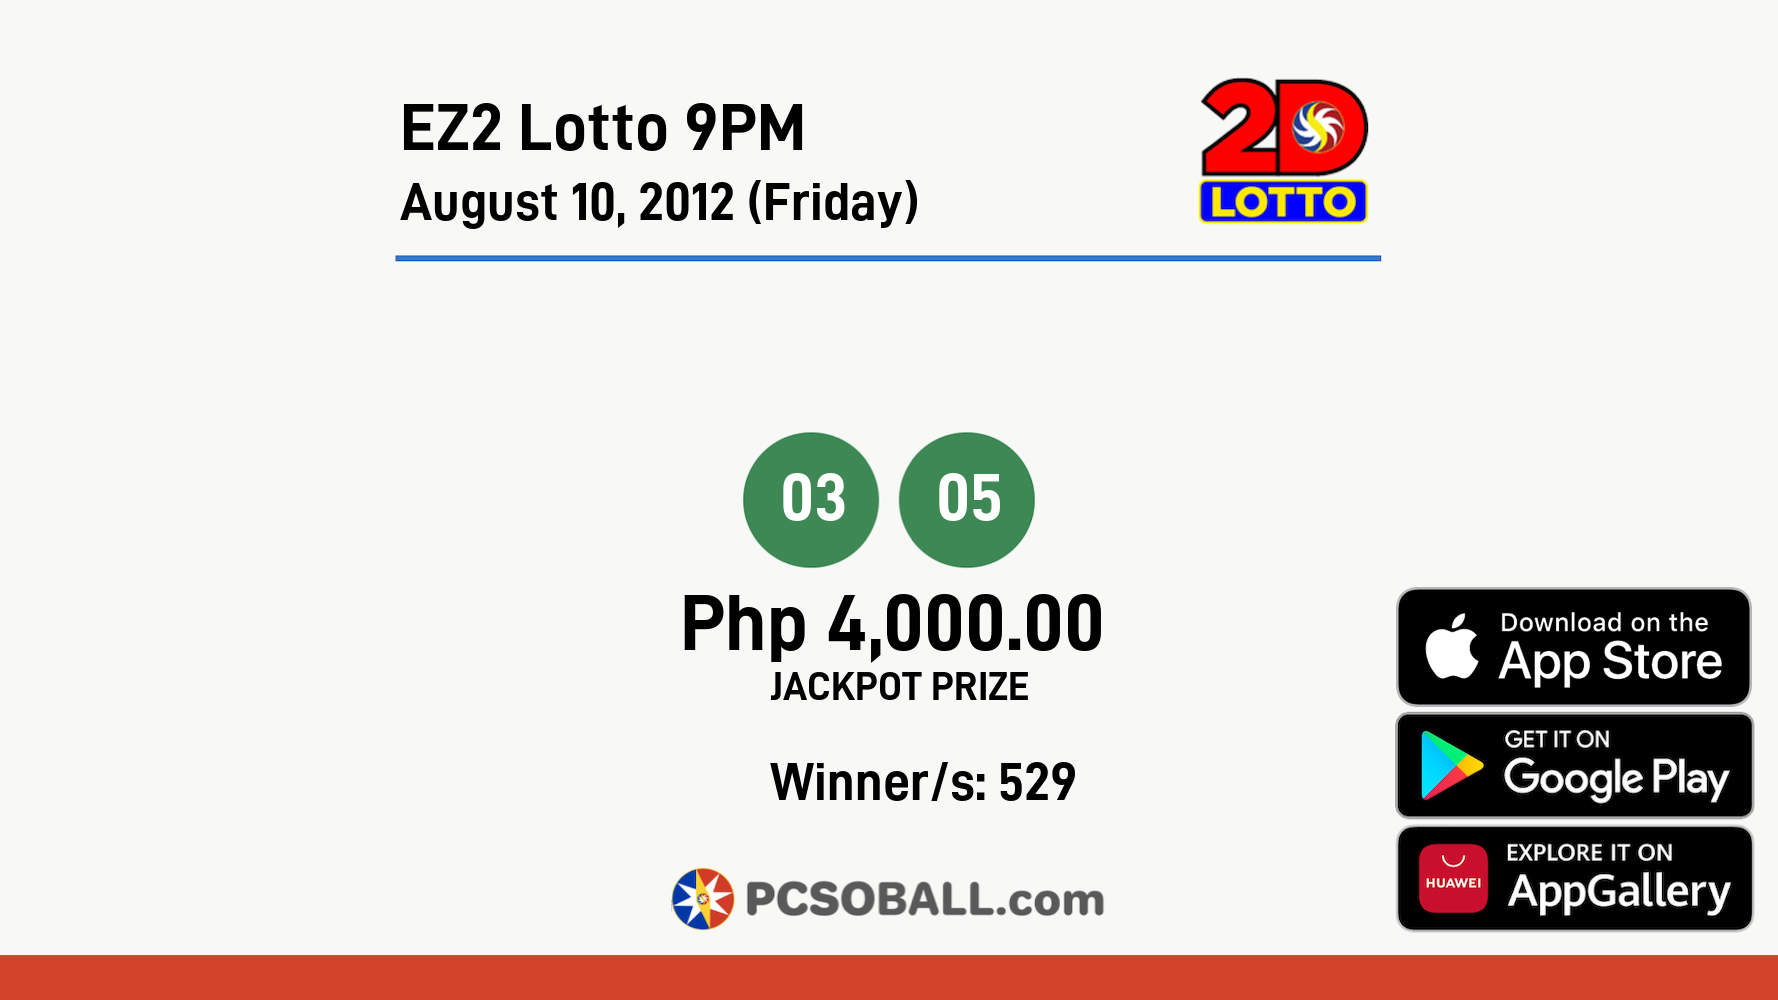 EZ2 Lotto 9PM August 10, 2012 (Friday) Result